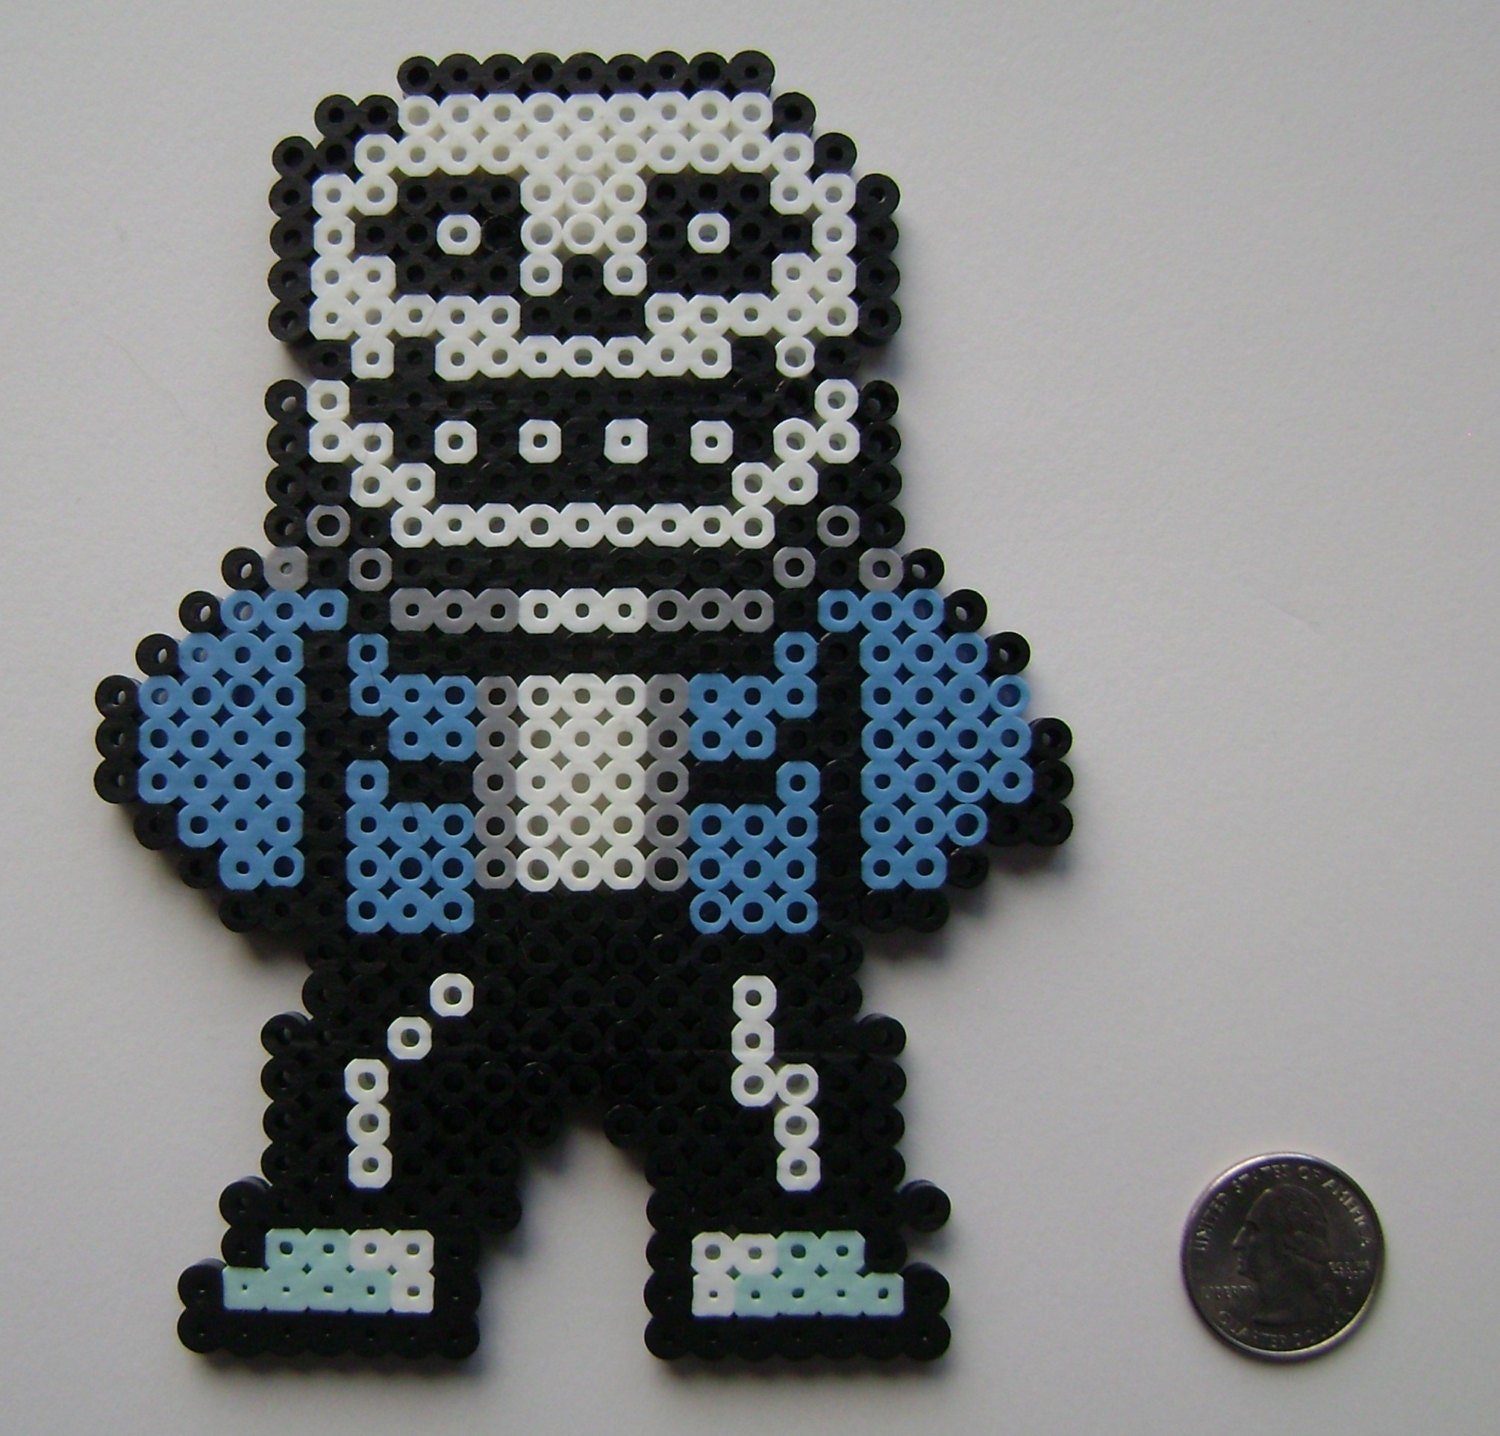 1000+ images about Undertale Perler / Hama beads on Pinterest